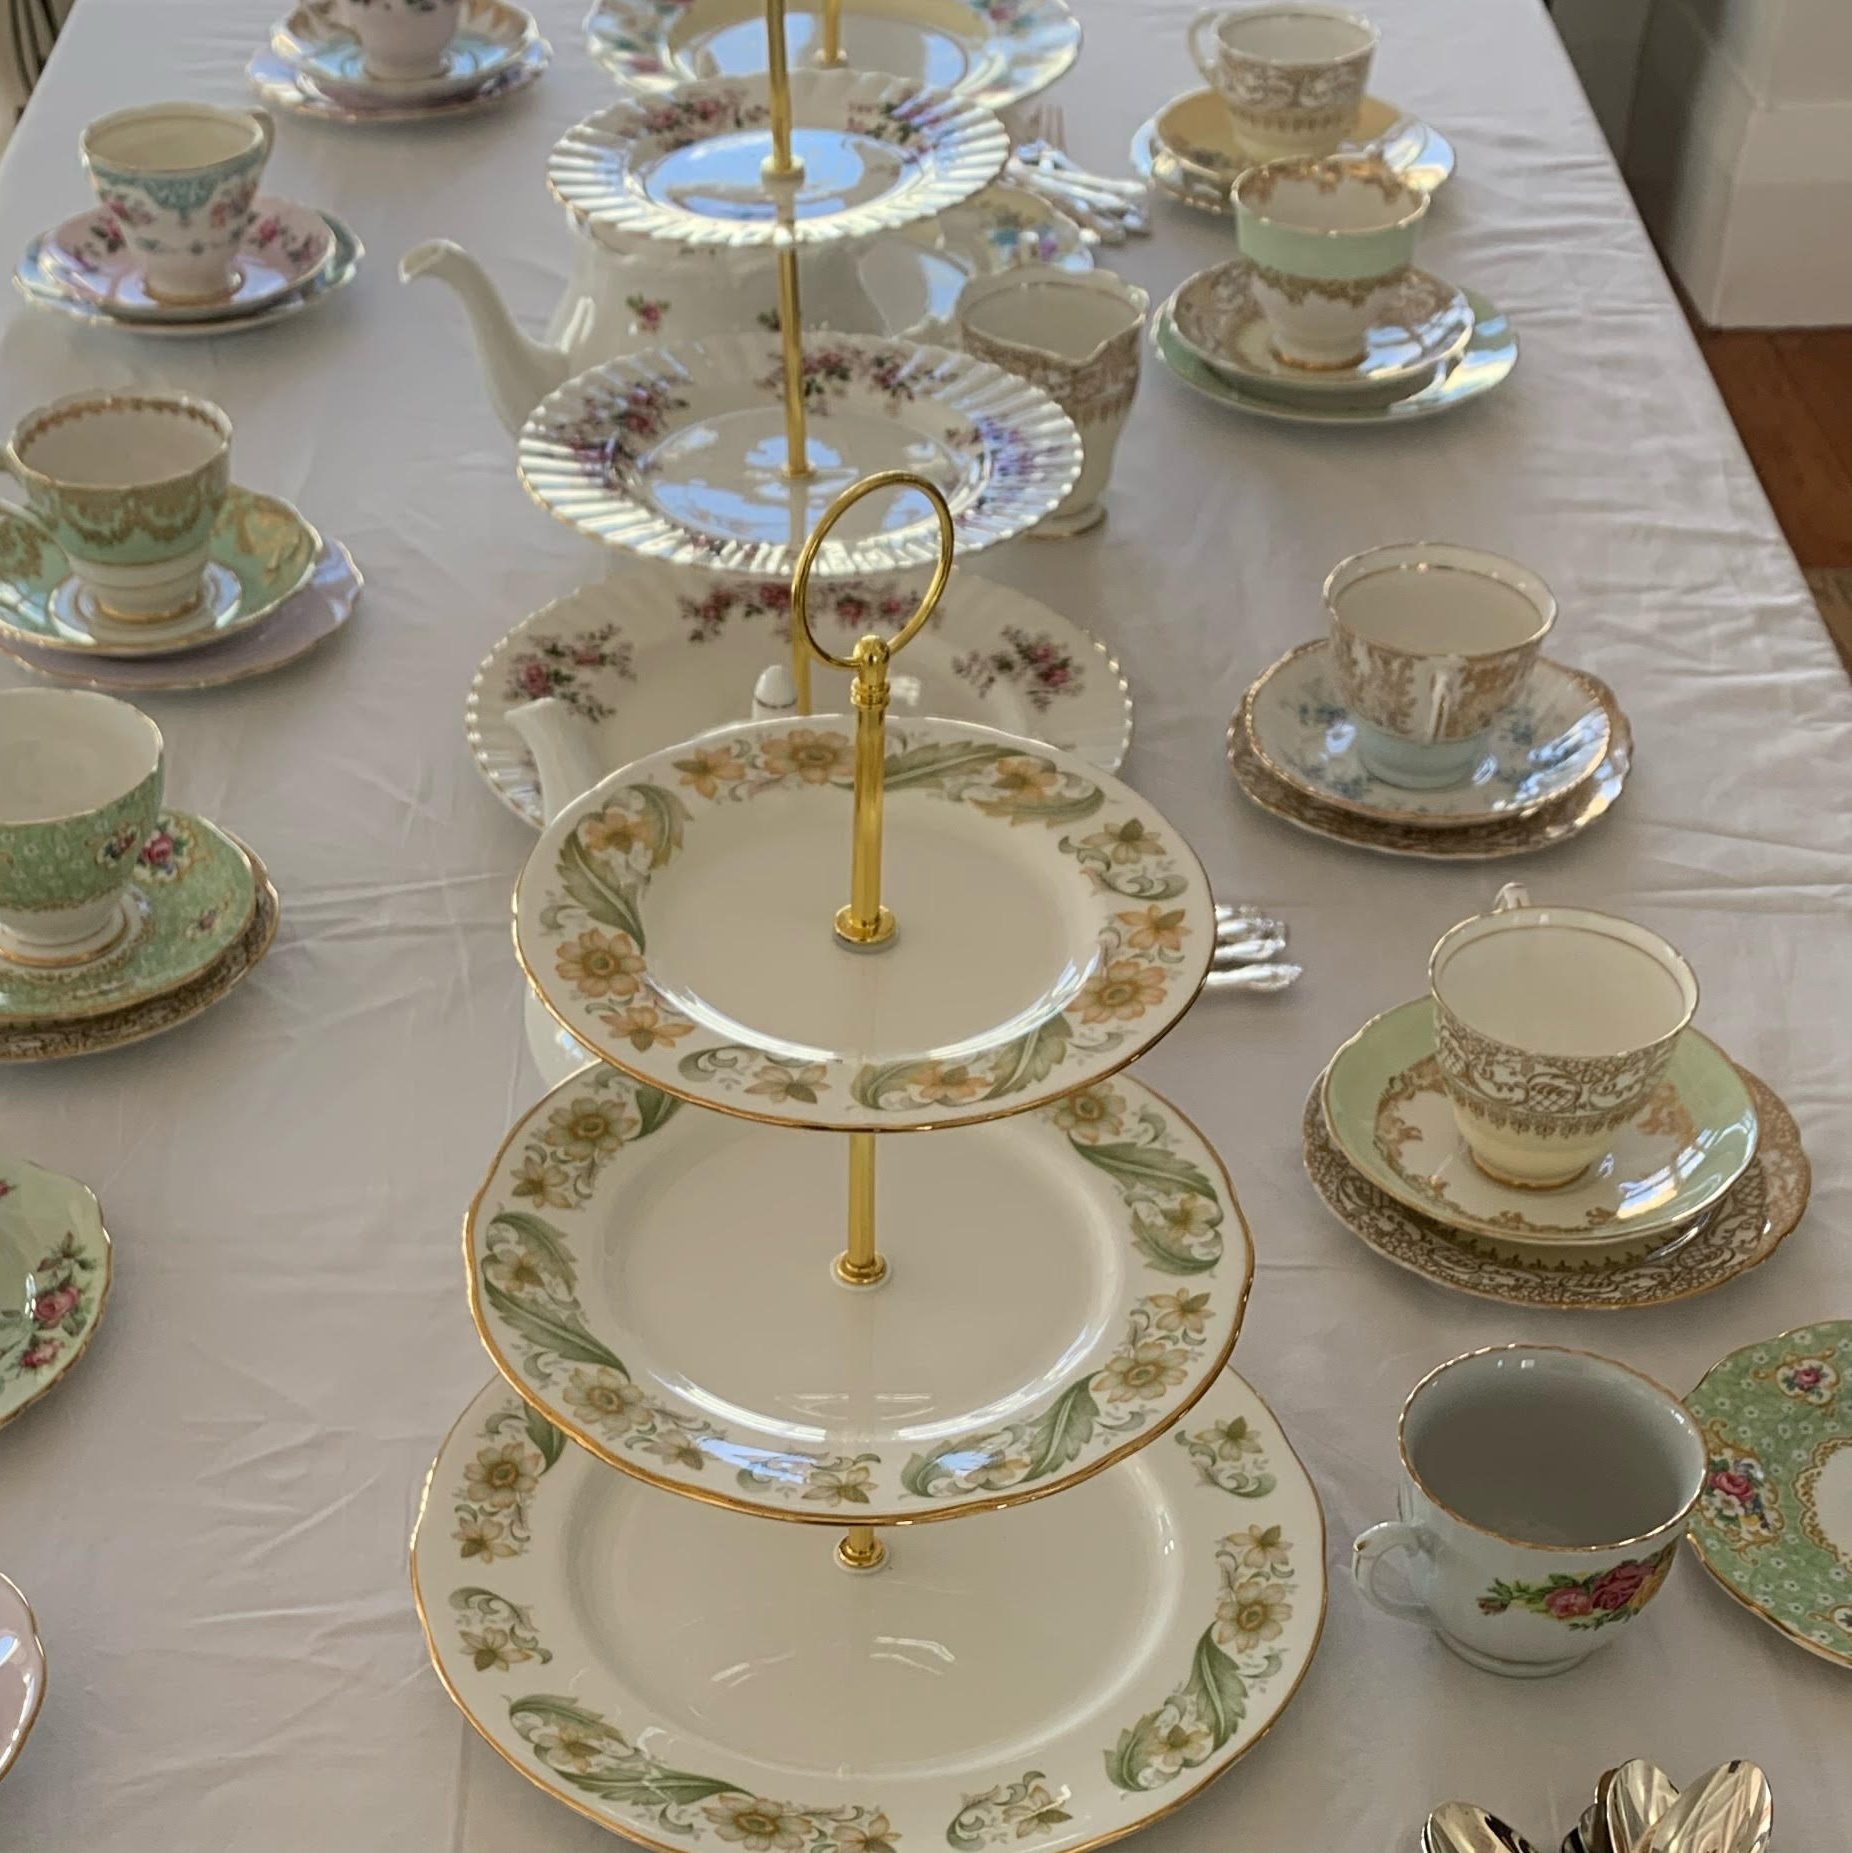 3-tiered cake stand and teacups for hire